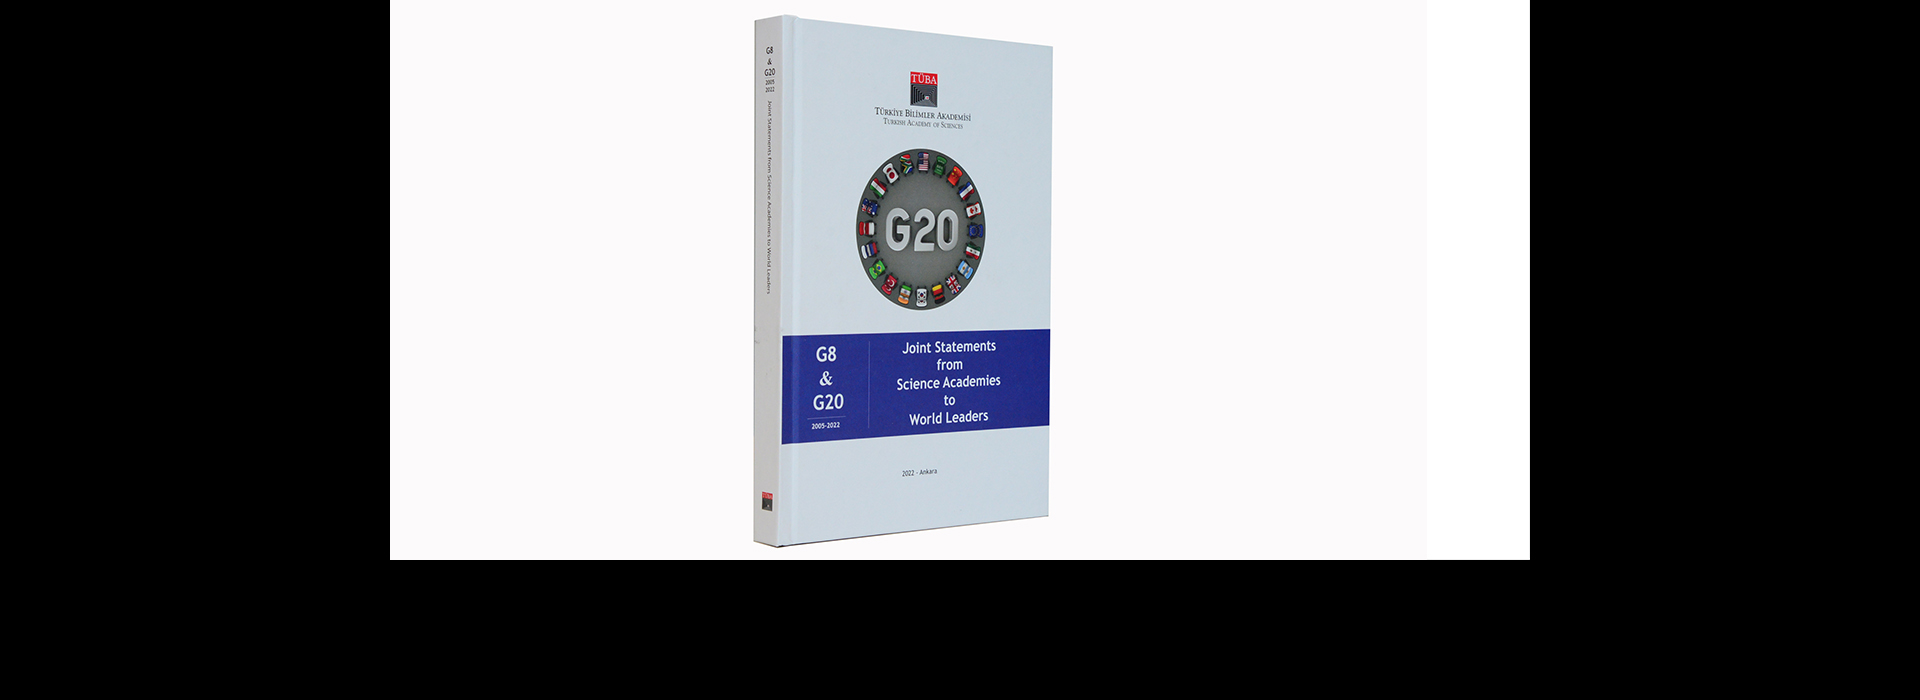 TÜBA Has Published the Book Titled “G8-G20 Joint Statements from Science Academies to World Leaders”